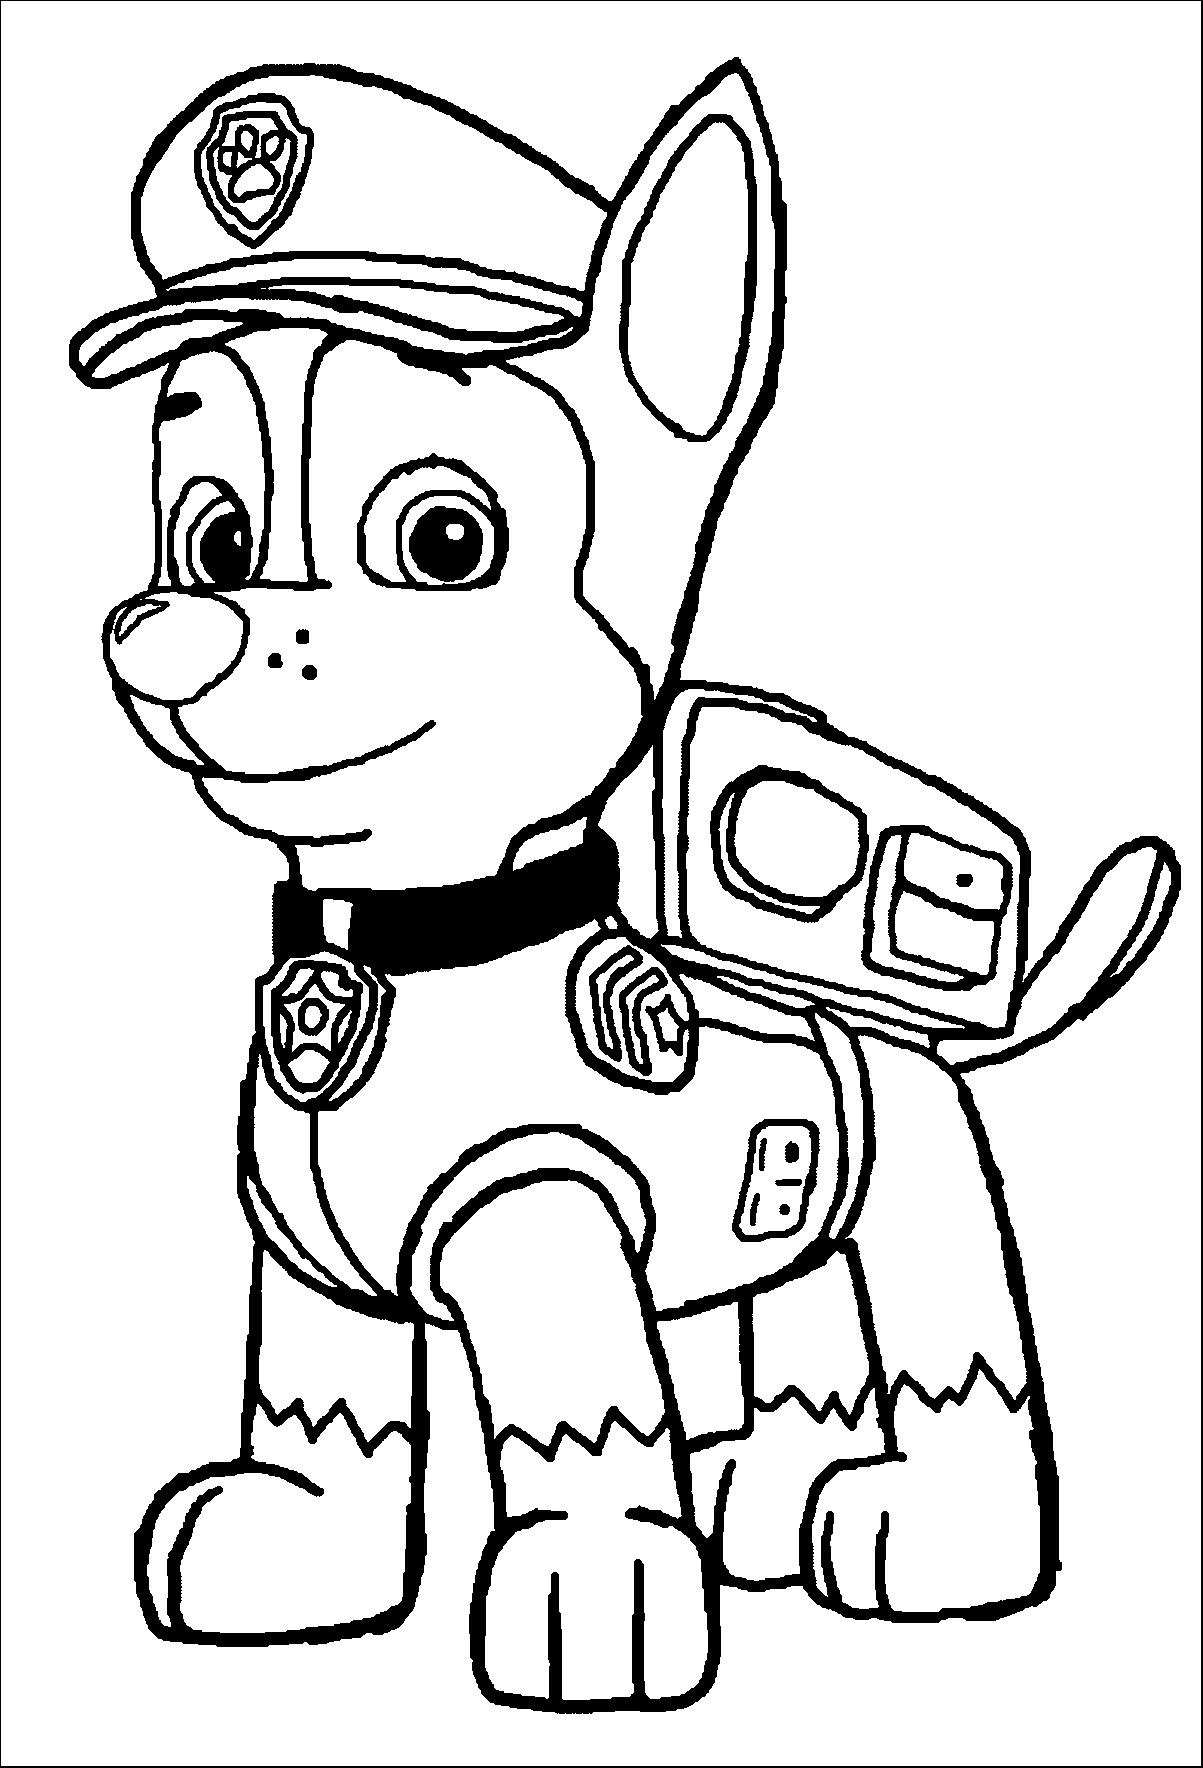 Paw Patrol Coloring Pages Marshall Coloring Pages Marshall Paw Patrol Coloring Page Best Of Rigyrbkdt